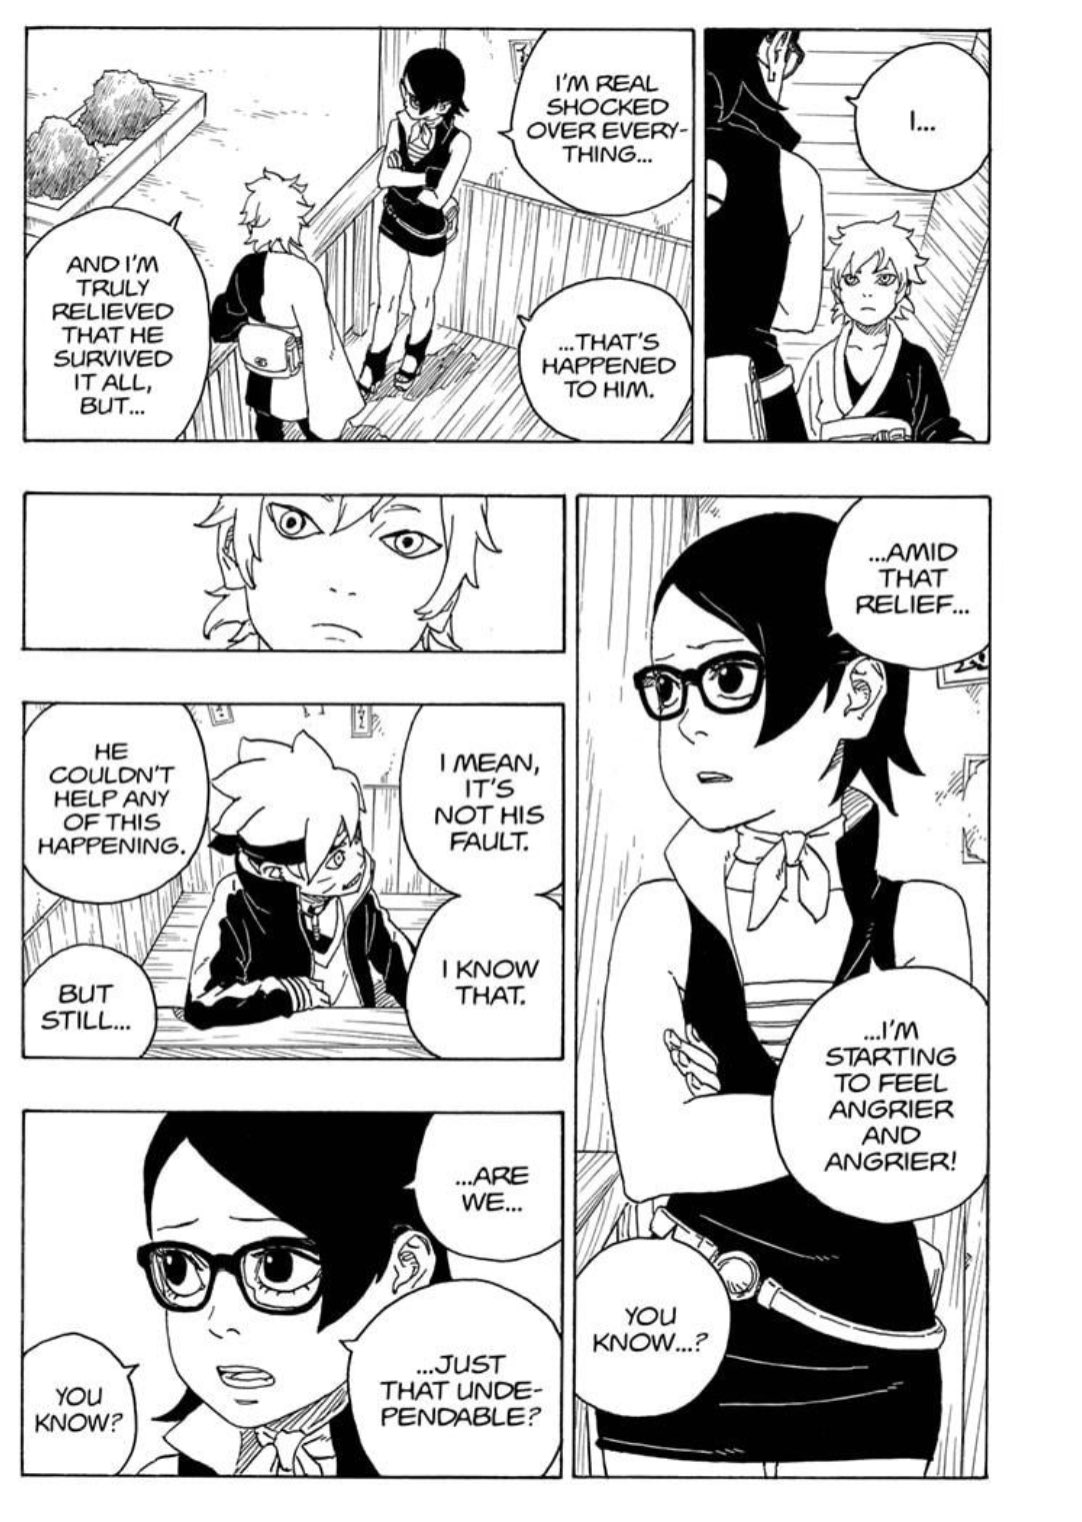 JALEX (SLASH)⚡ on X: Took ice spice on a date and finally got her to read  Boruto manga. Boruto is now her favorite series, so we will be discussing  the return of